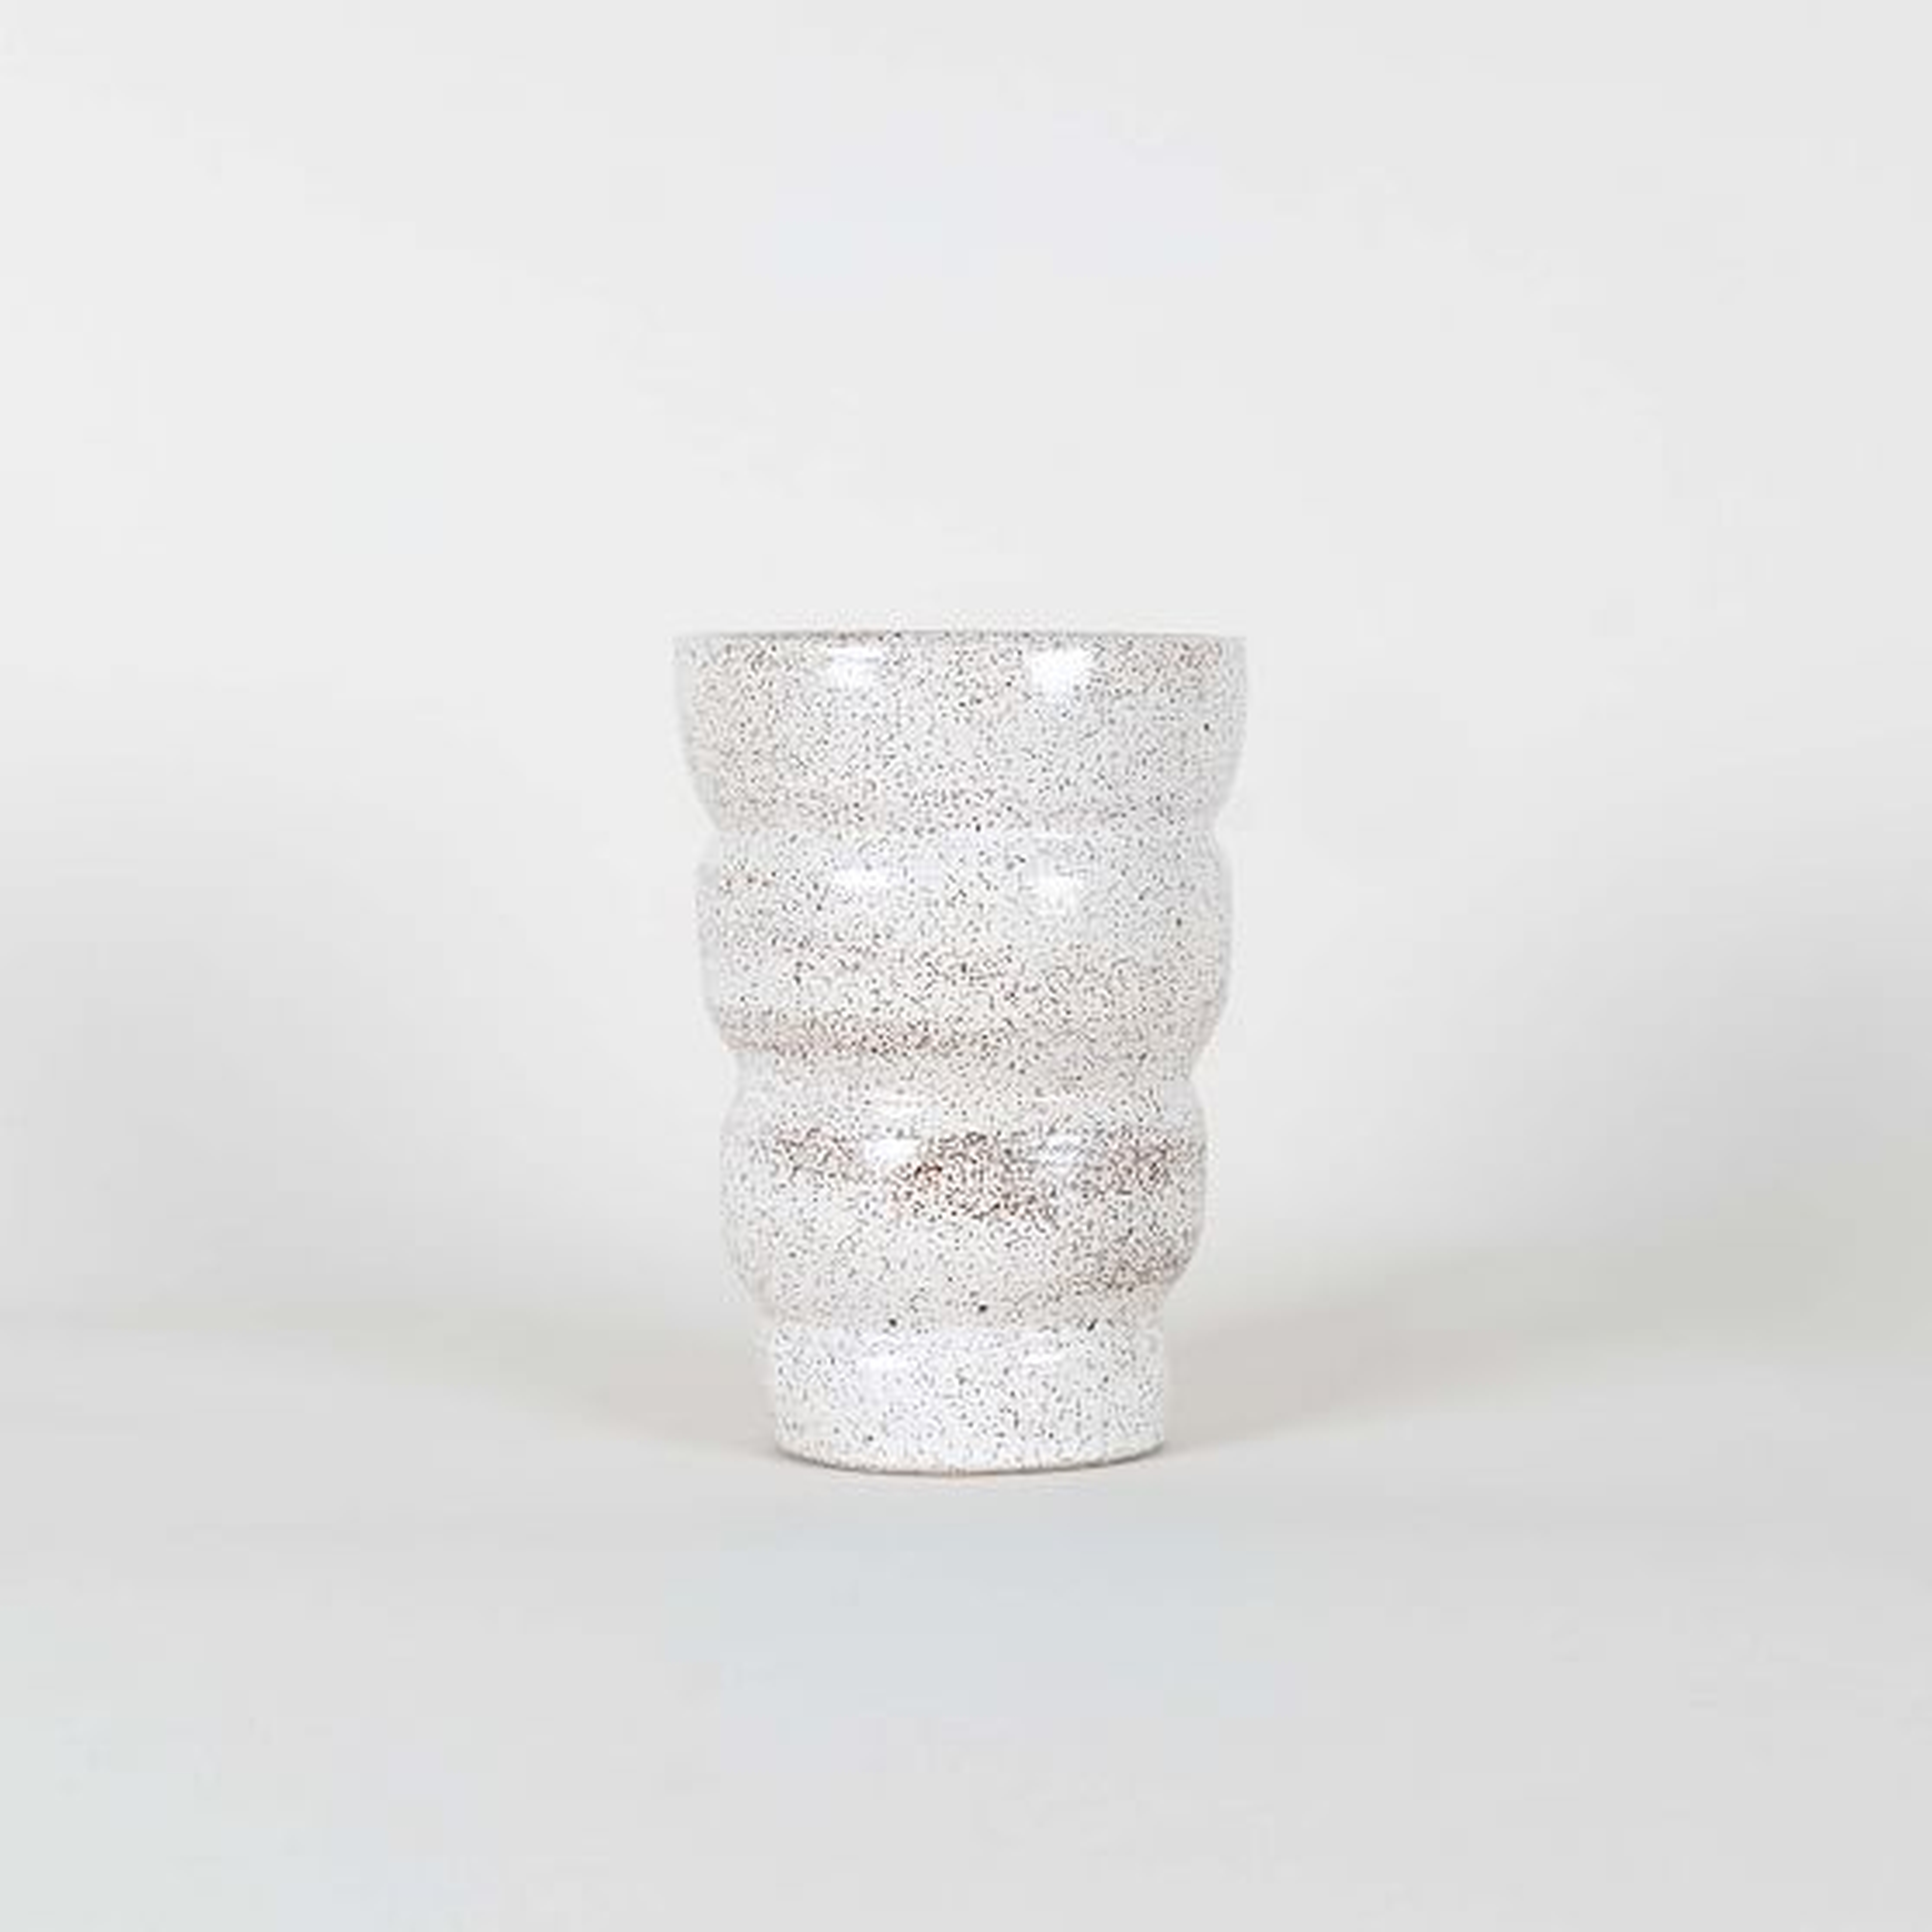 Utility Objects Small Vase, Speckled White - West Elm